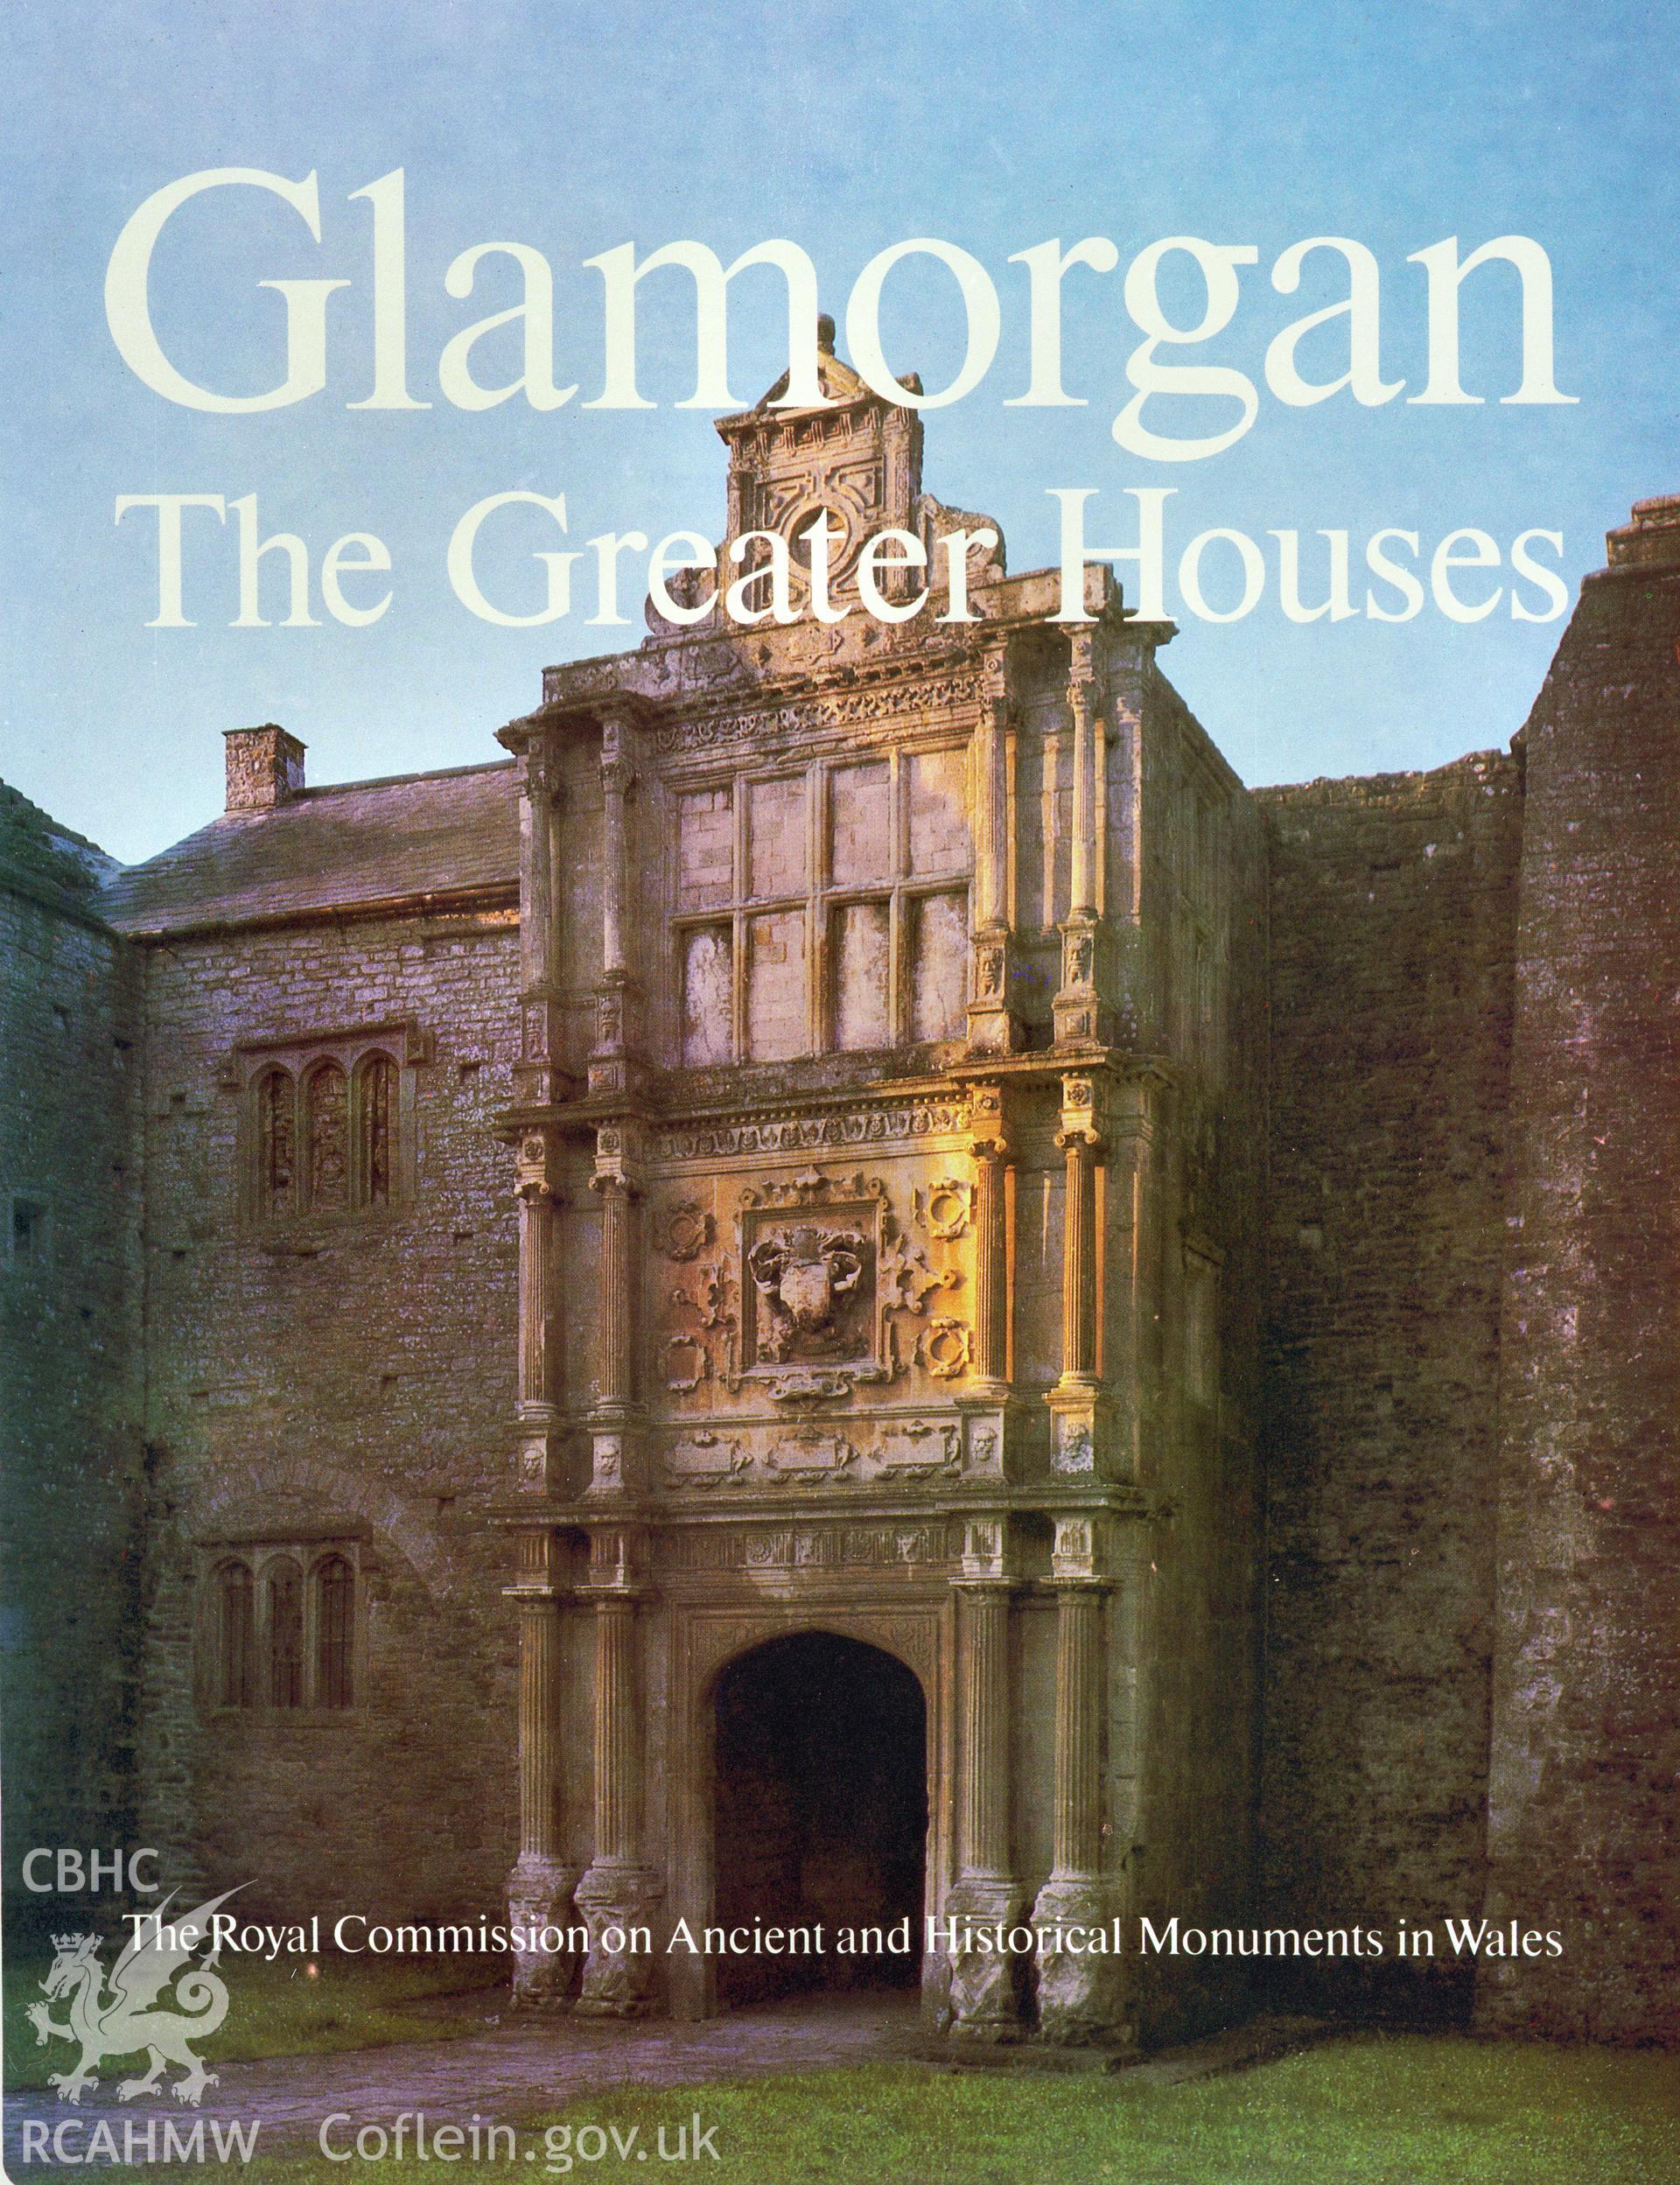 Colour transparency of the  cover of the RCAHMW Publication of Glamorgan Greater Houses.